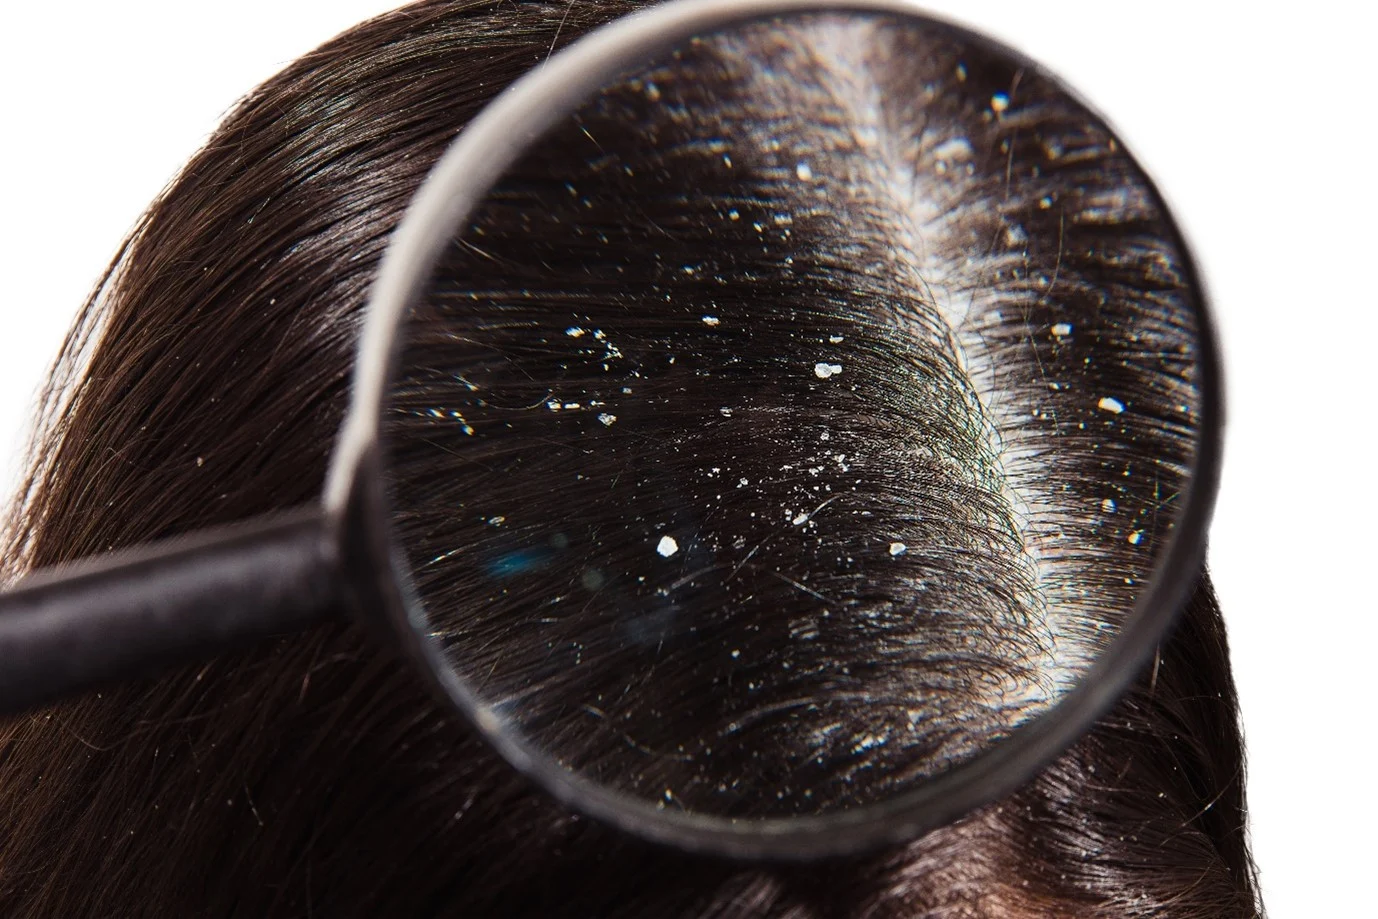 Looking for Dandruff Through Magnifying Glass